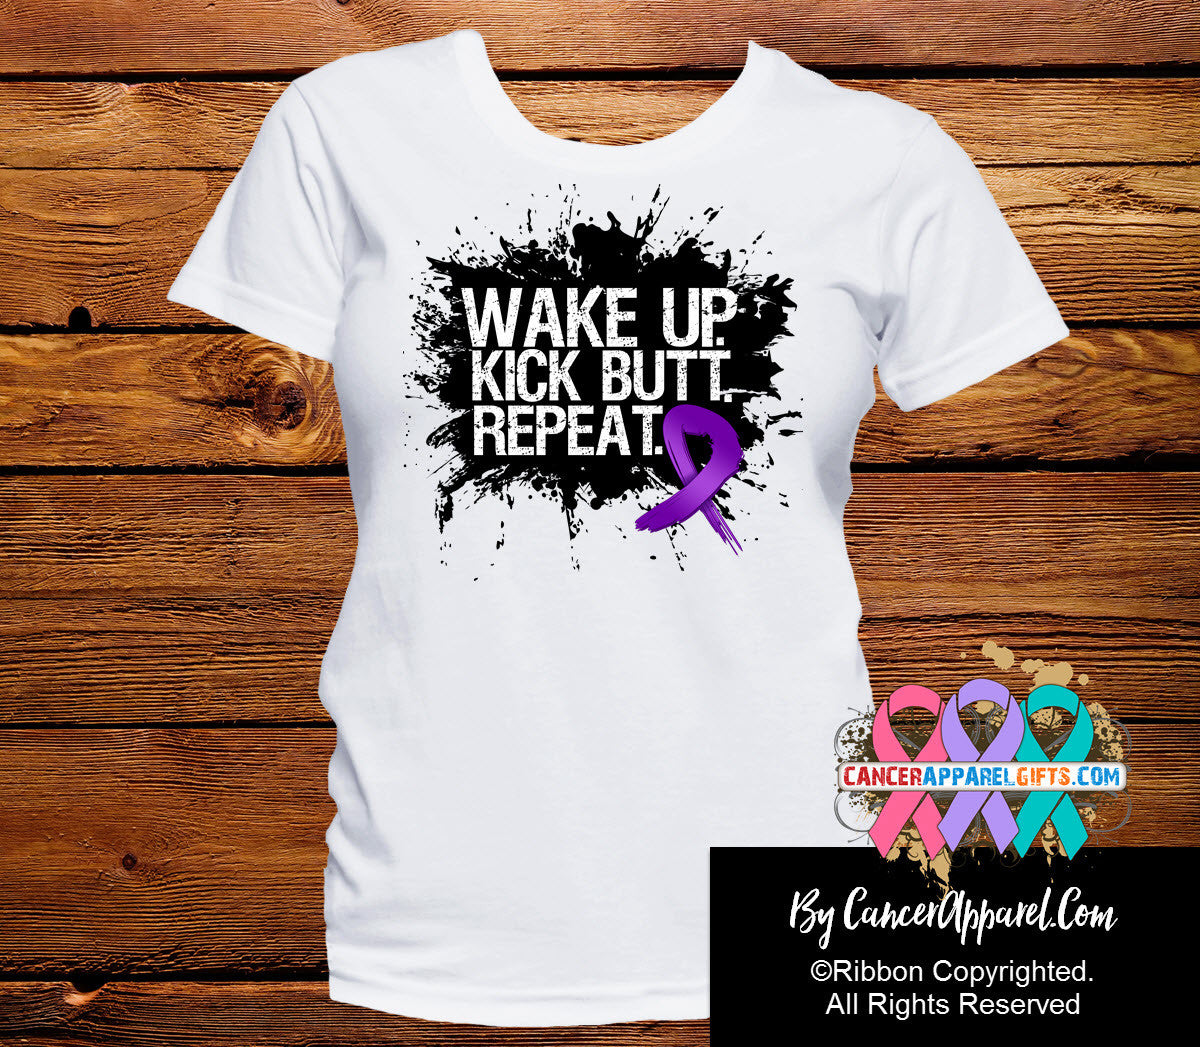 Pancreatic Cancer Shirts Wake Up Kick Butt and Repeat - Cancer Apparel and Gifts